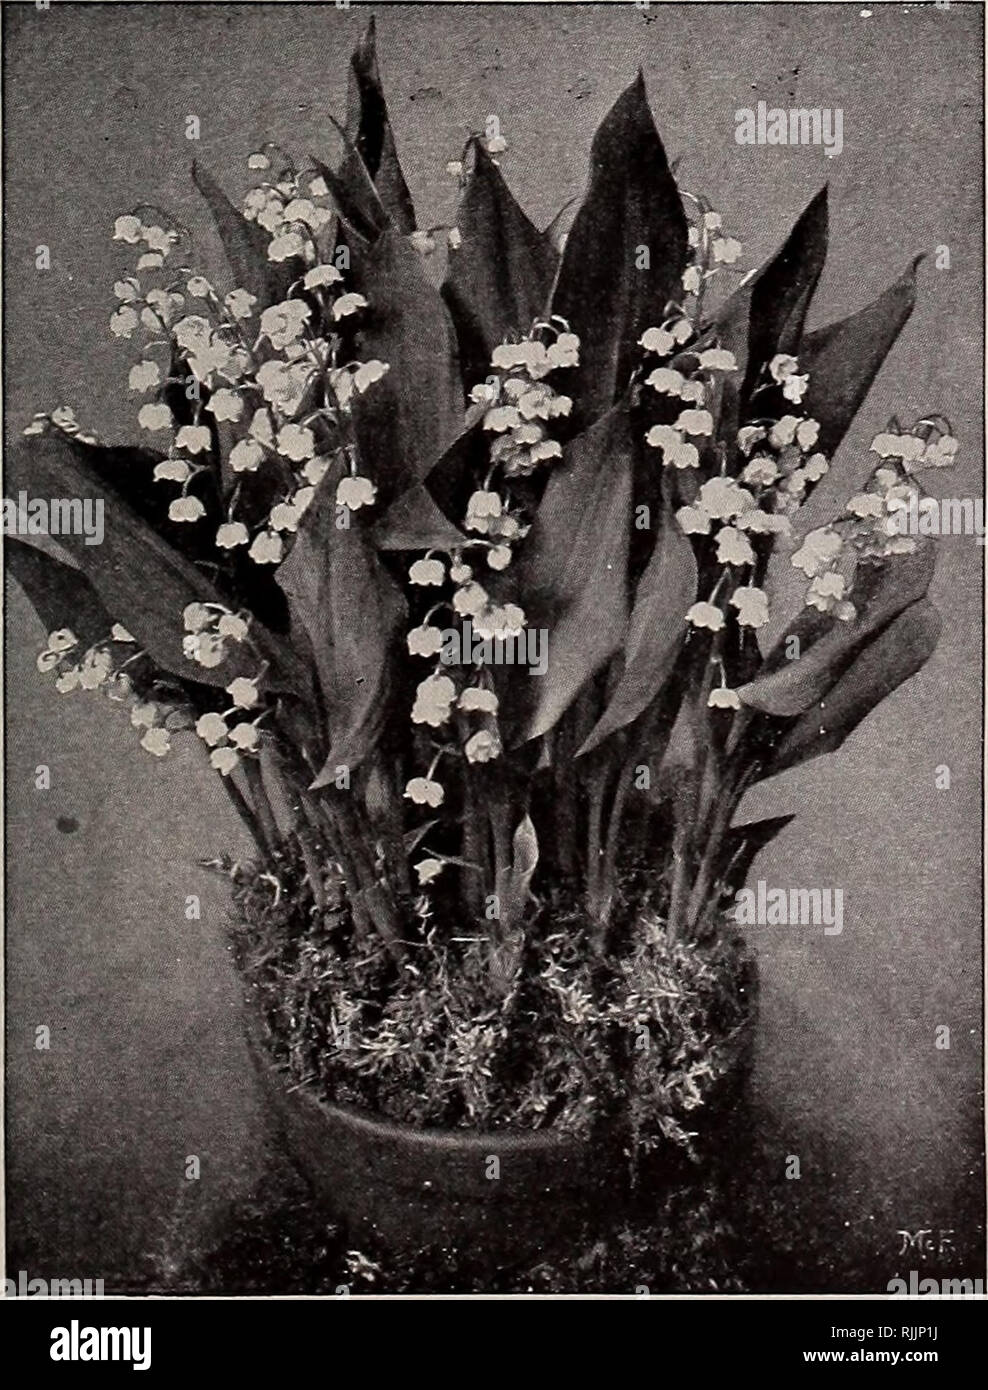 . Beckert's bulb catalogue : fall 1914. Nurseries (Horticulture) Pennsylvania Pittsburgh Catalogs; Nursery stock Pennsylvania Pittsburgh Catalogs; Flowers Seeds Pennsylvania Pittsburgh Catalogs; Bulbs (Plants) Pennsylvania Pittsburgh Catalogs; Gardening Pennsylvania Pittsburgh Equipment and supplies Catalogs. BECKERT'S ANNUAL AUTUMN CATALOGUE OF CHOICEST BULBS 19 INCARVILLEA (Hardy Gloxinia) Delavayi. Hardy, beautiful, trumpet- Each Doz. Doz. p'd. shaped, deep rose-carmine flowers with yellow throat; borne in clusters on iongstems. $0 15 $1 50 SI 62 Grandiflora. Beautiful pink; larger flowers  Stock Photo